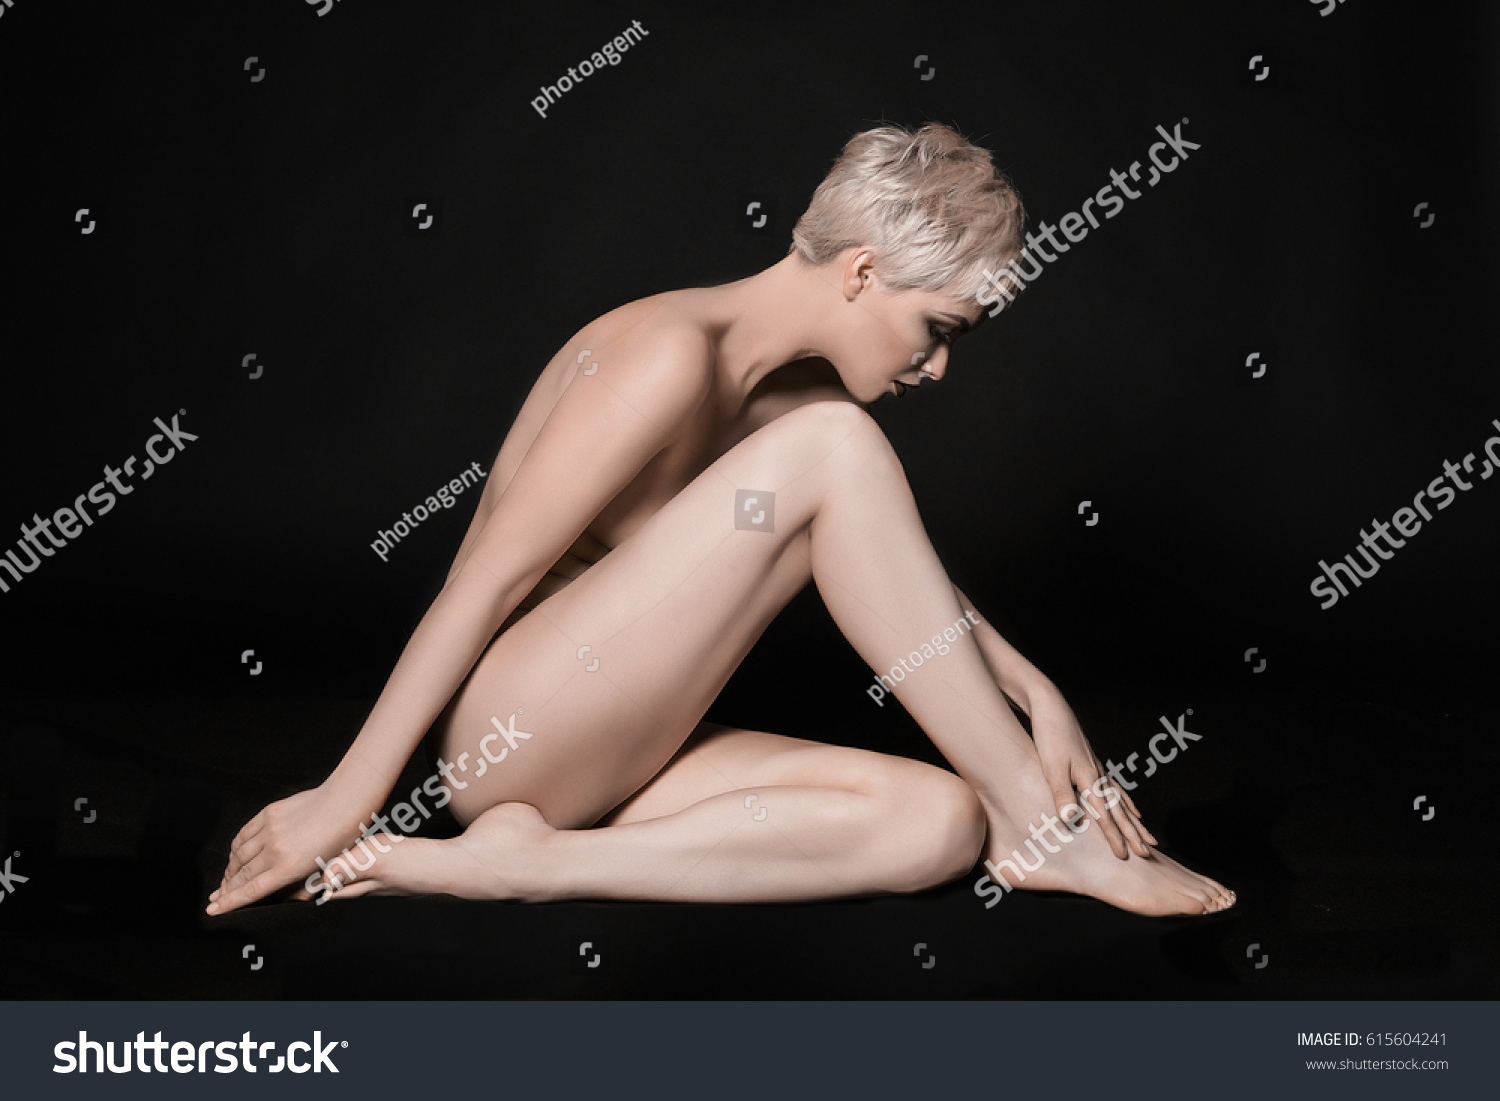 women with super short hair naked